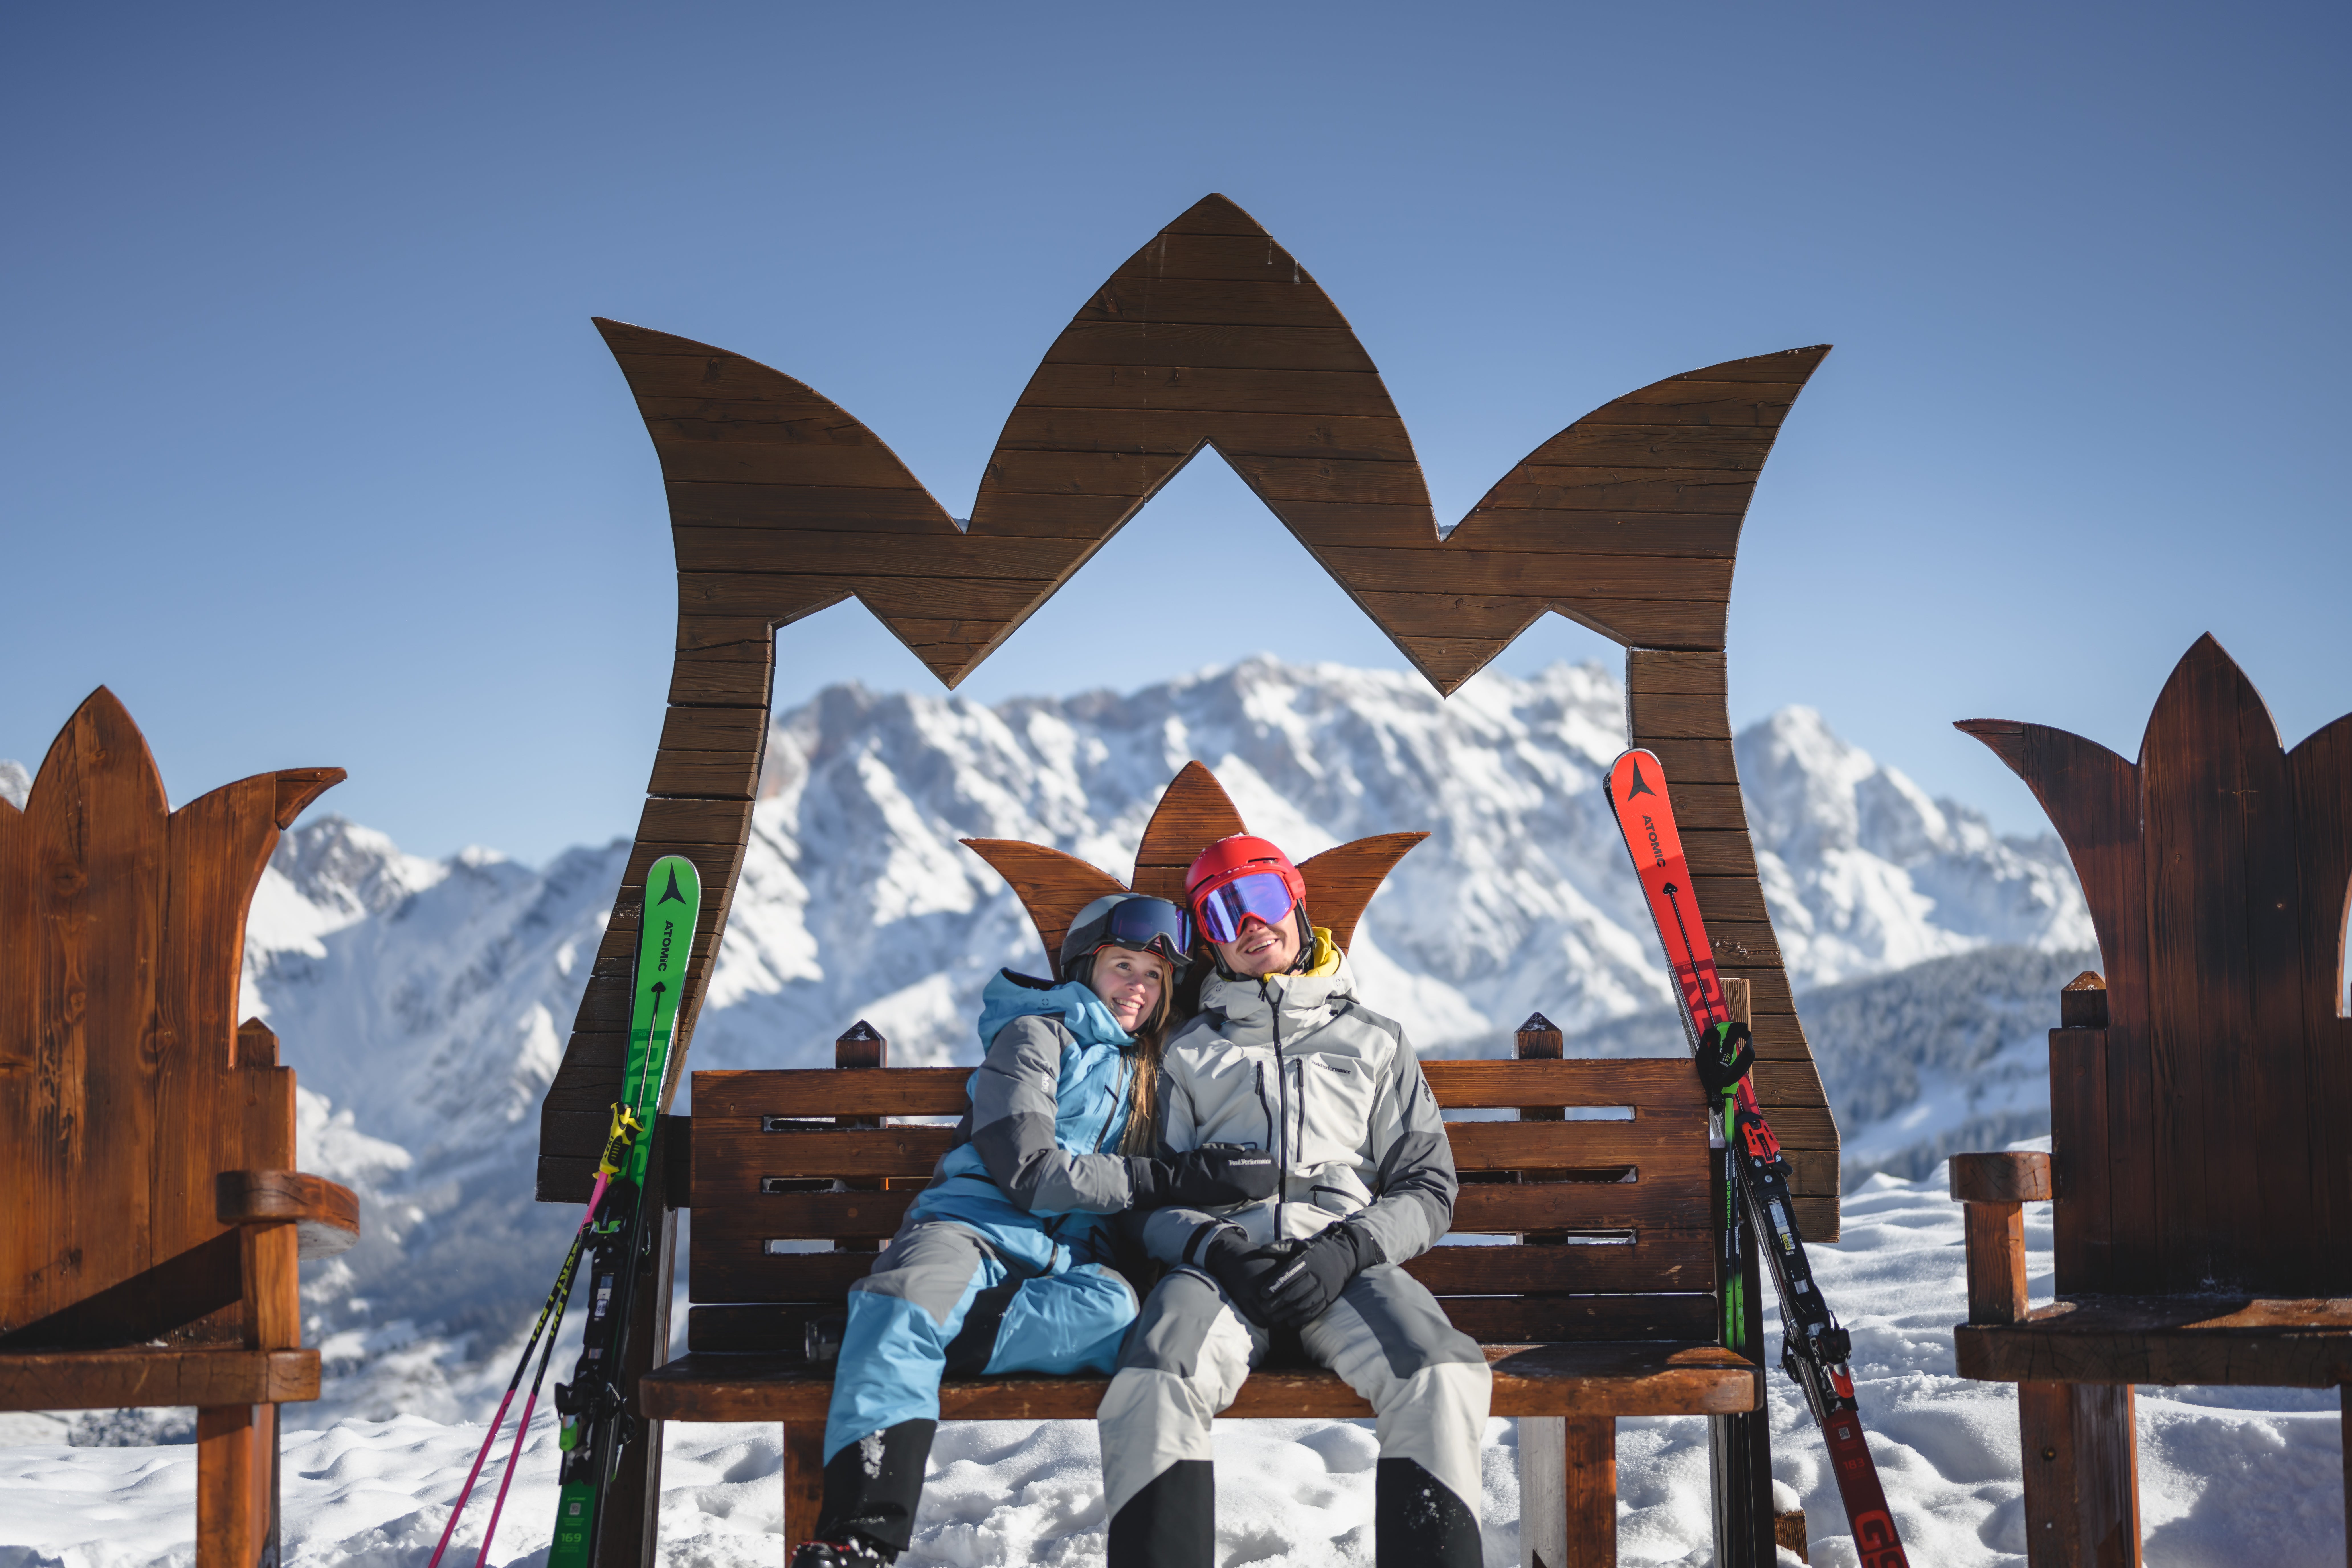 From foodie festivals to full moon dinners, you can max the fun off-piste